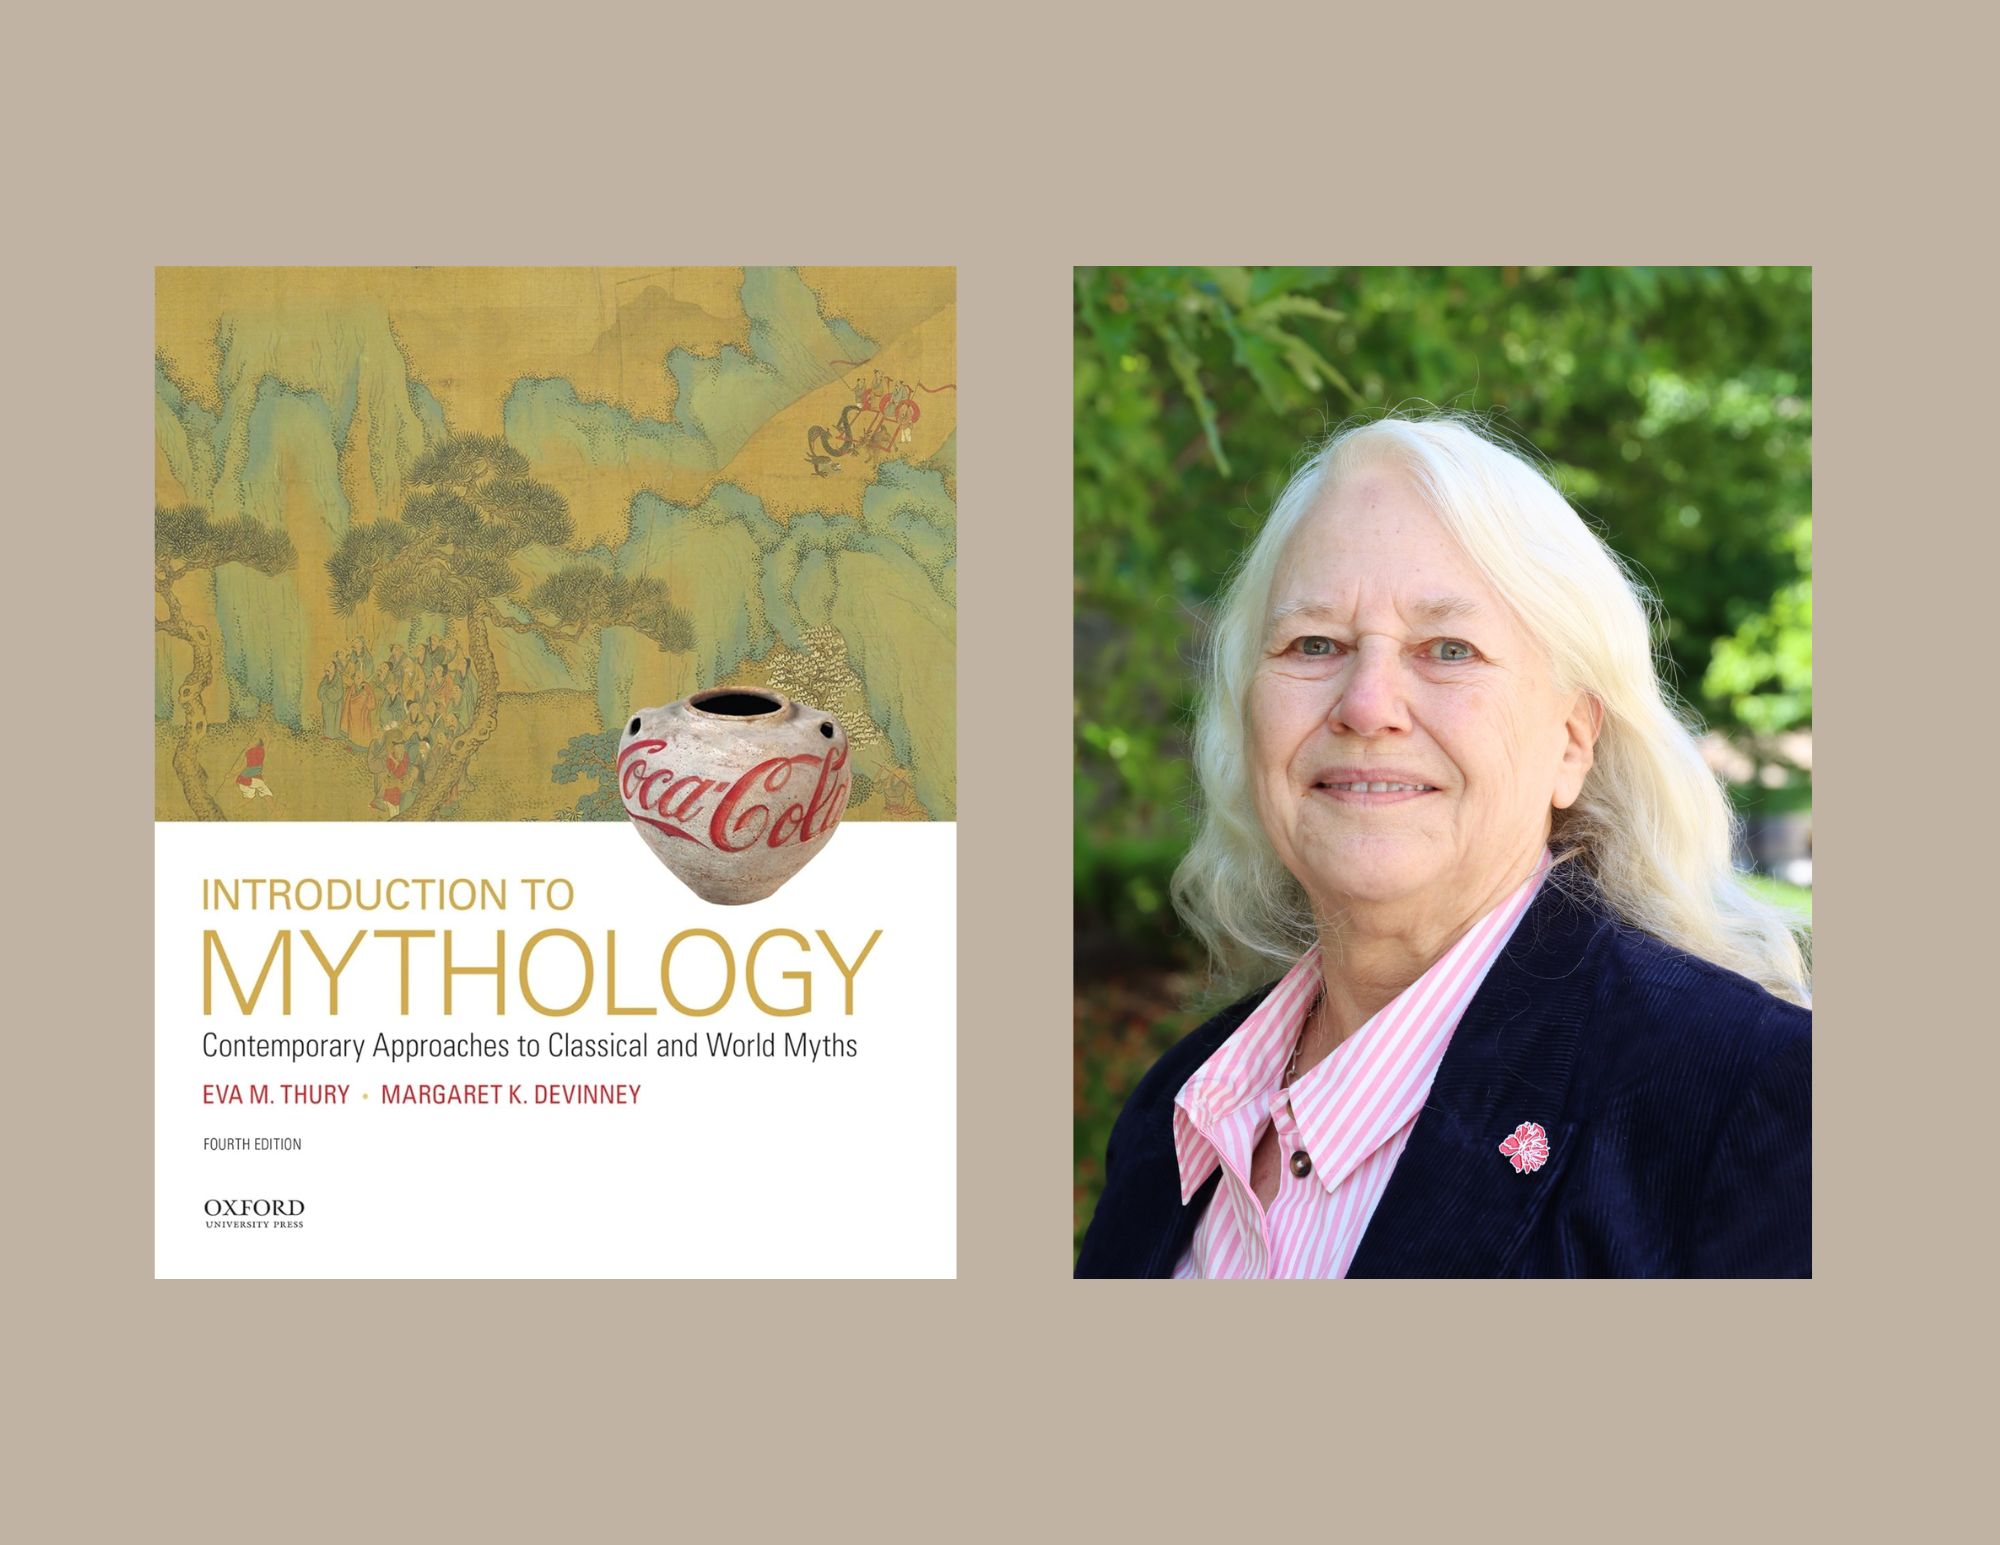 A lavender-grey background with two photos side-by-side. The first is the cover of Dr. Thury's book, "Introduction to Mythology: Contemporary Approaches to Classical and World Myths." The second is a headshot of Dr. Thury, smiling in front of trees. She is wearing a dark blue blazer, a pink pin, and a pink-and-white collared shirt.